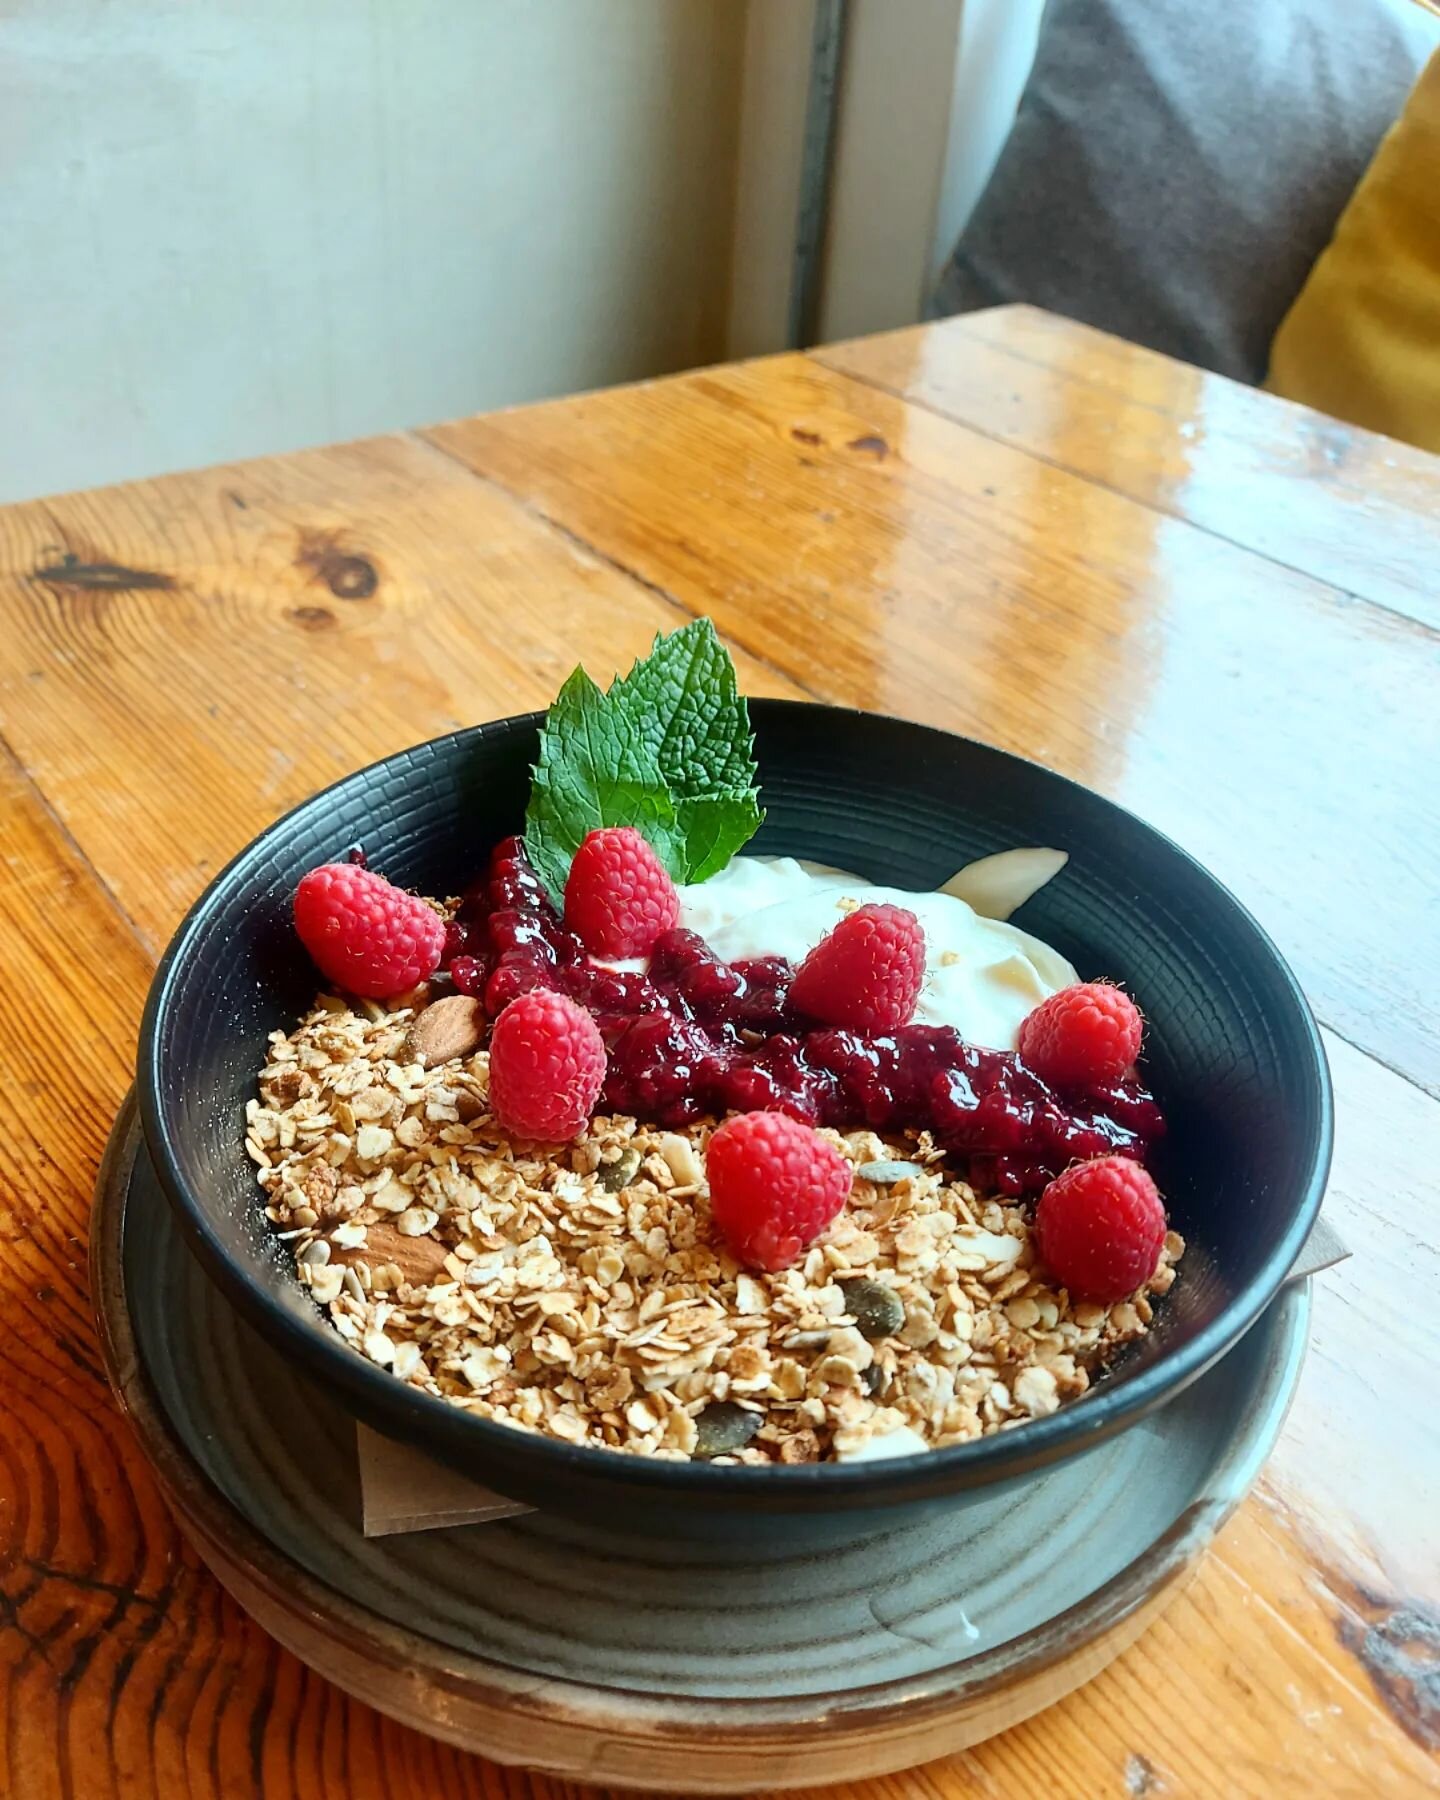 Happy long weekend!! We're manifesting sunshine here with our GFTS granola bowl..on our menu since day one and always a winner
🍓💛

Have a great weekend friends! 💛